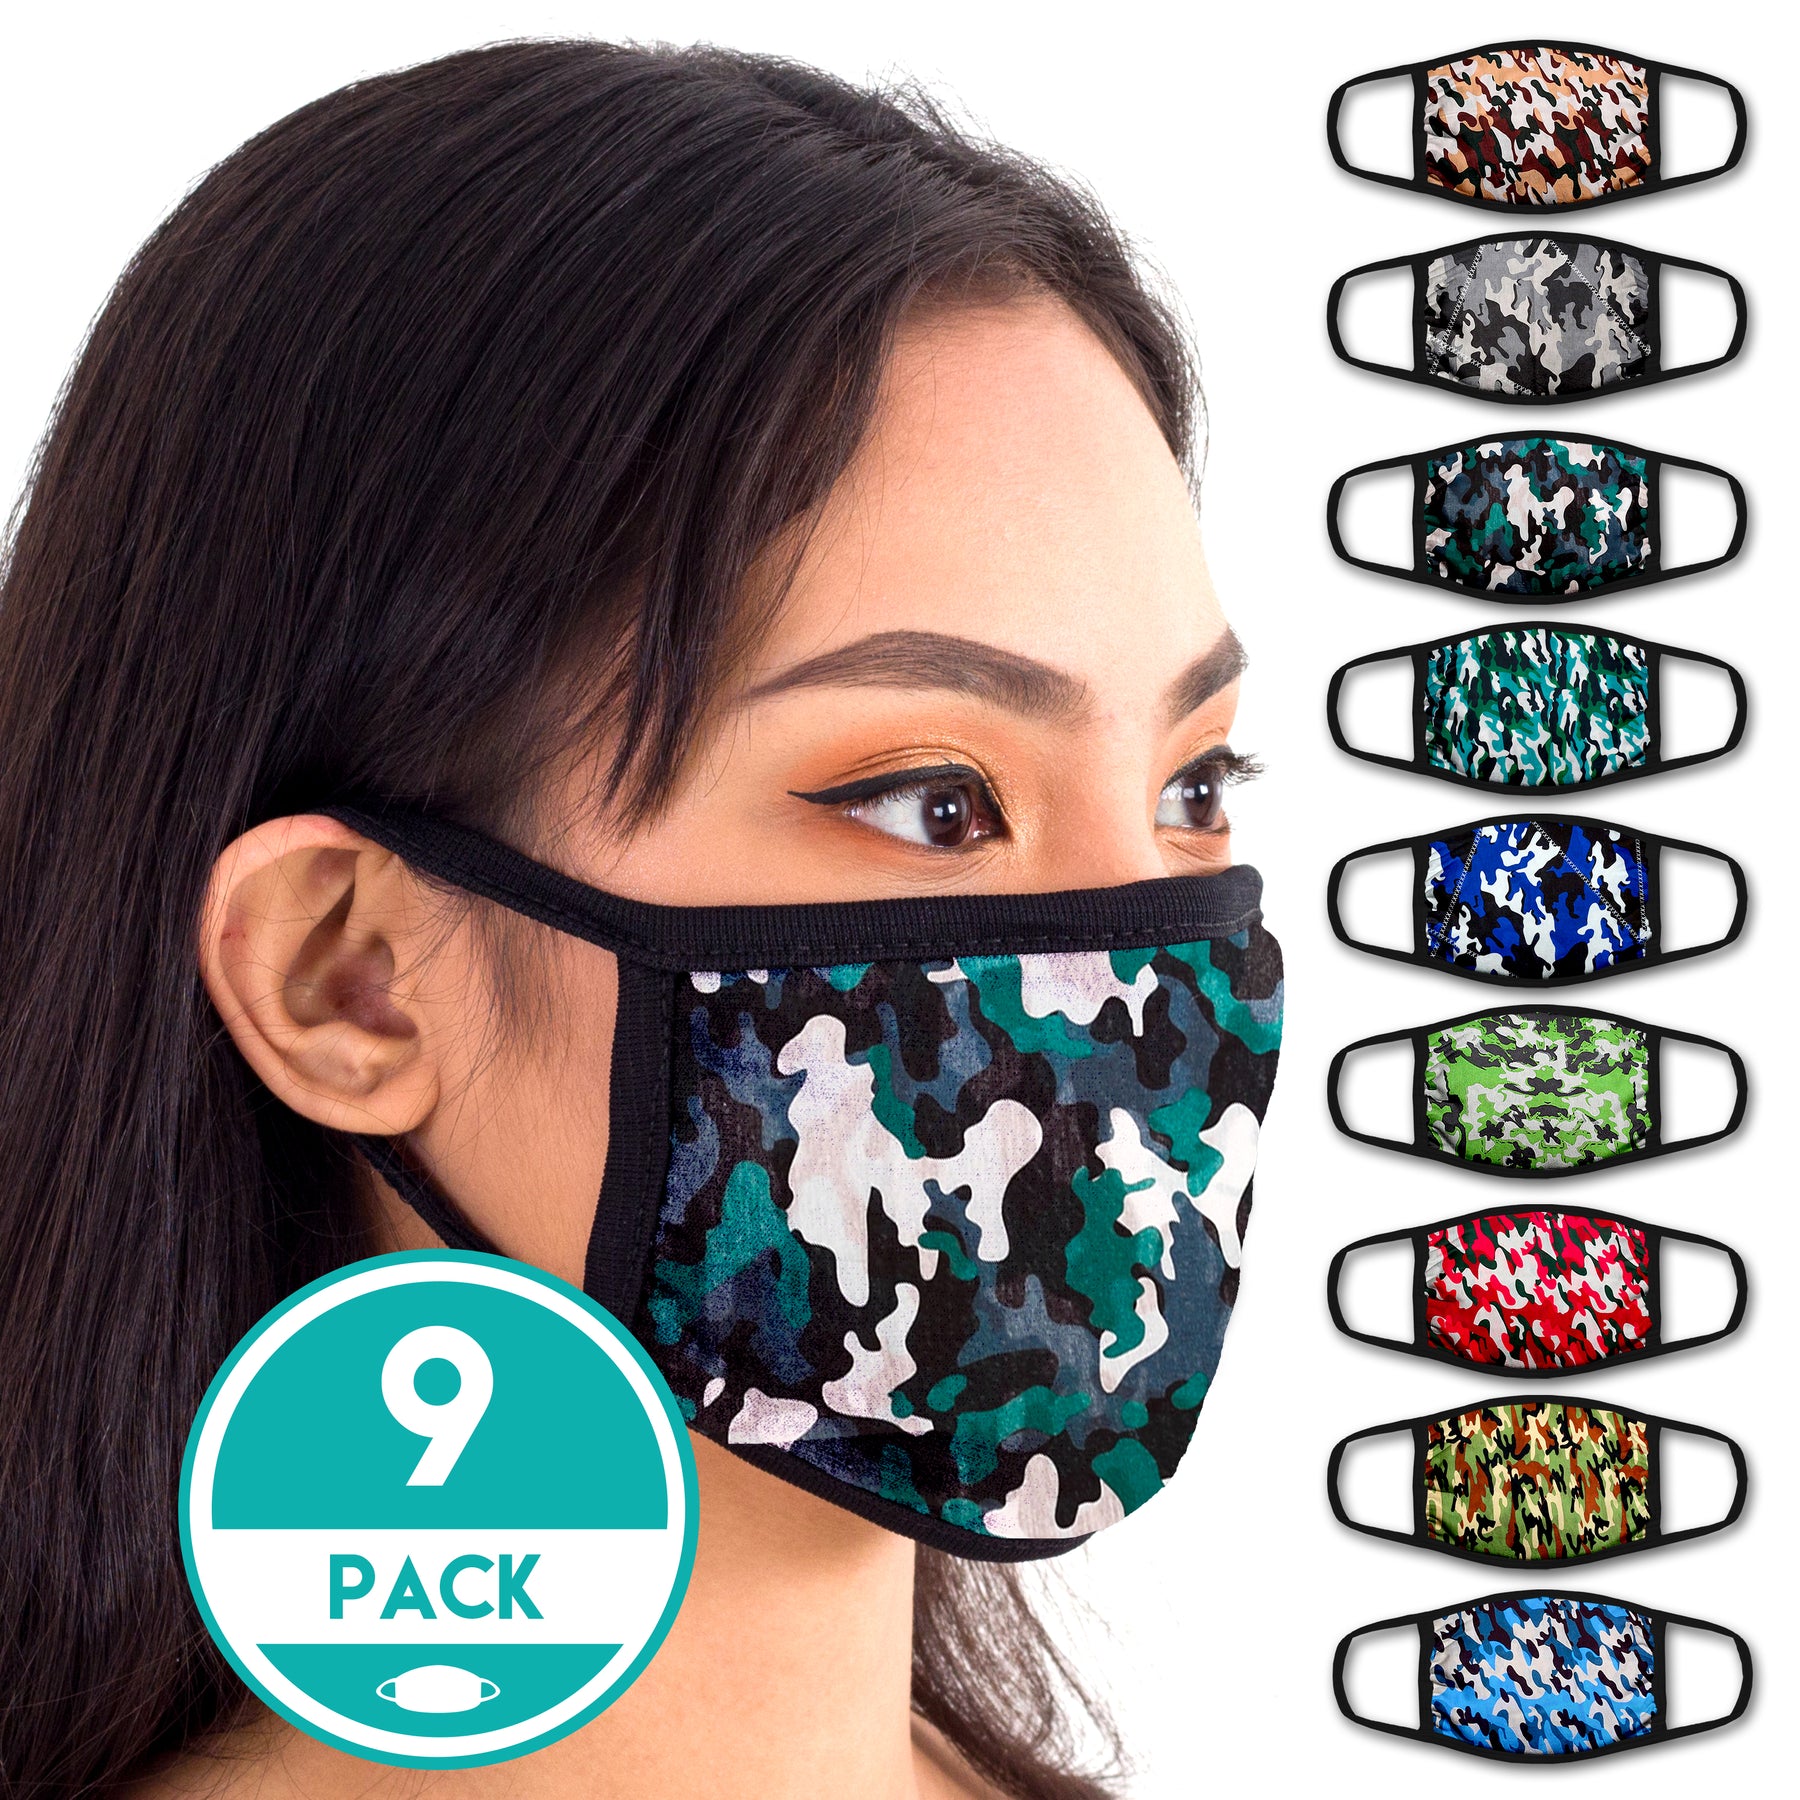 Face Mouth Mask - Cotton Face Covering (9 Pack Camo)